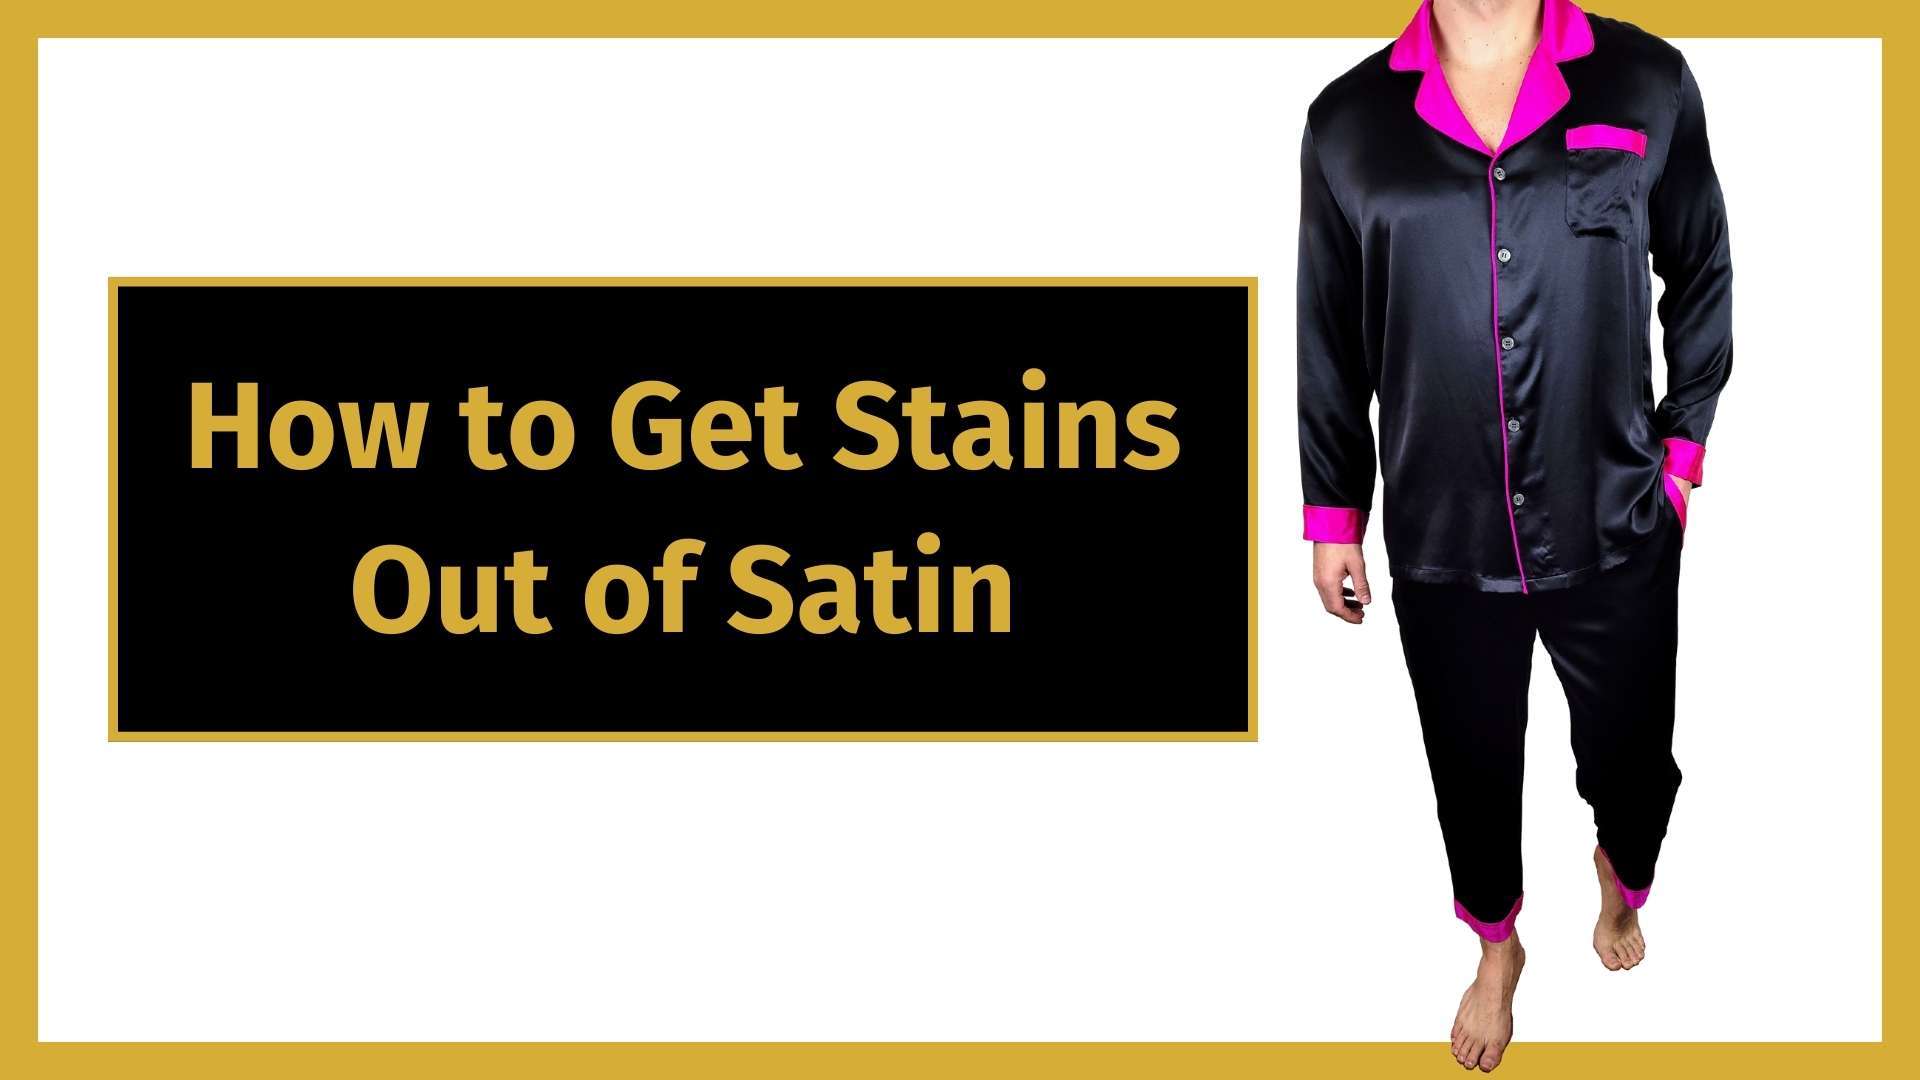 how to get stains out of satin banner image with a man wearing a pair of satin pajamas